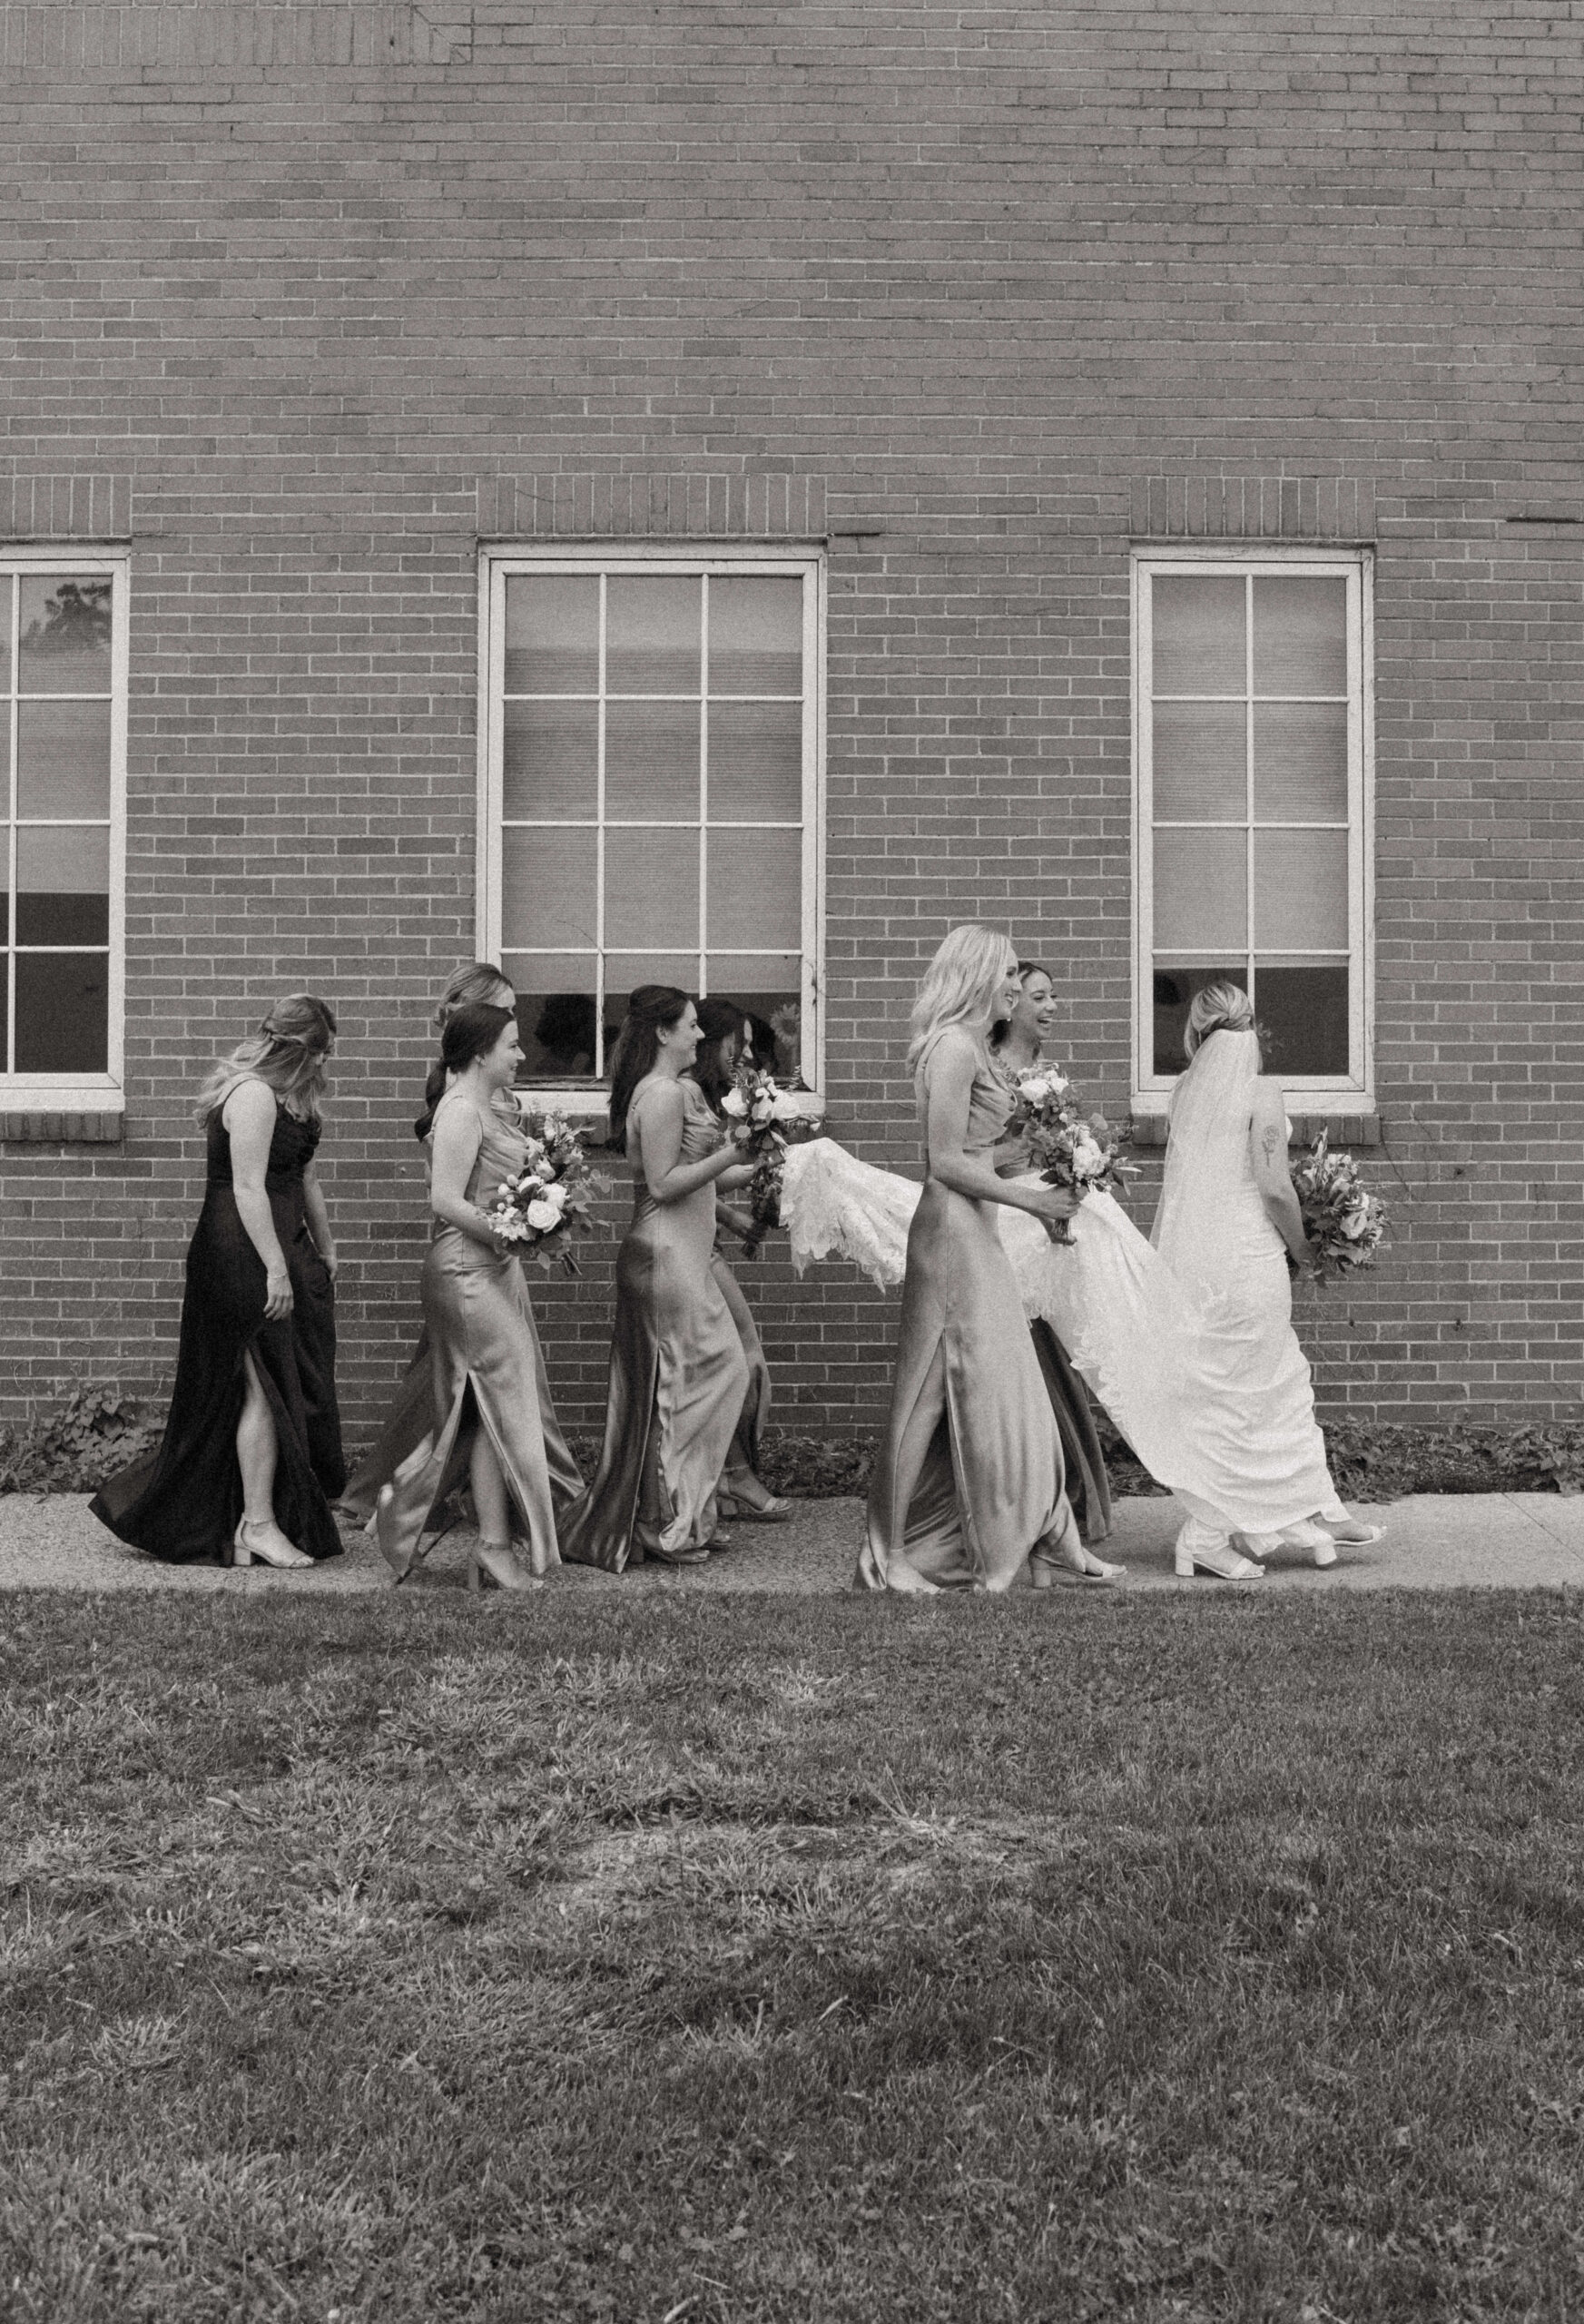 This is a picture of bridesmaids taking picture with a bride